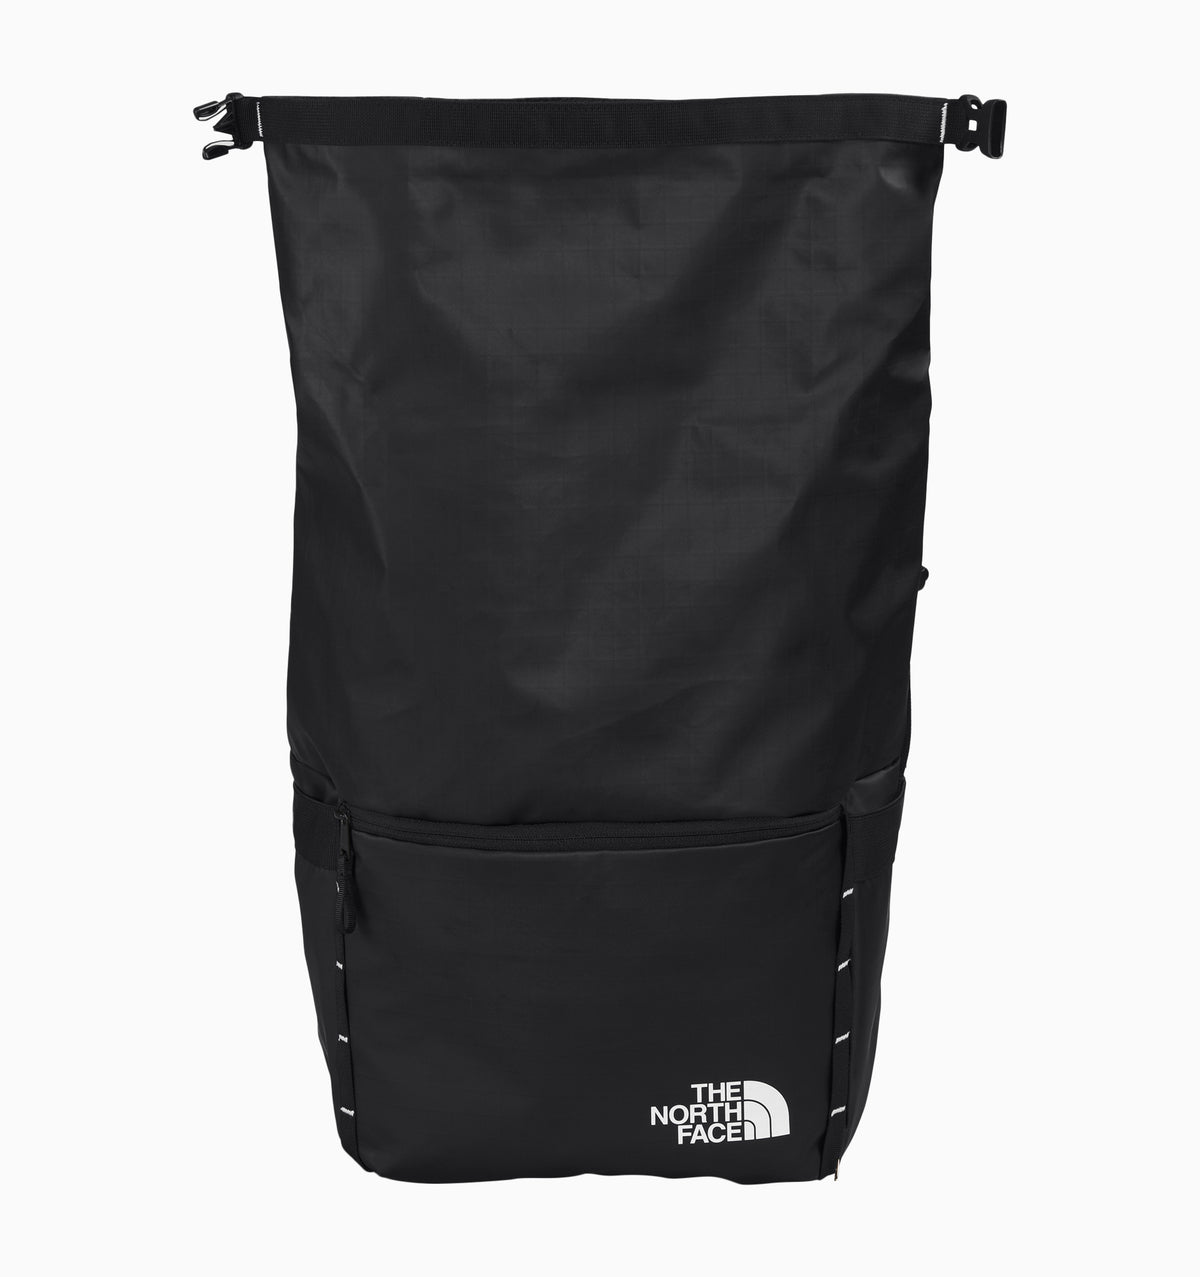 The North Face 16" Base Camp Voyager Roll Top Backpack 25L - Black